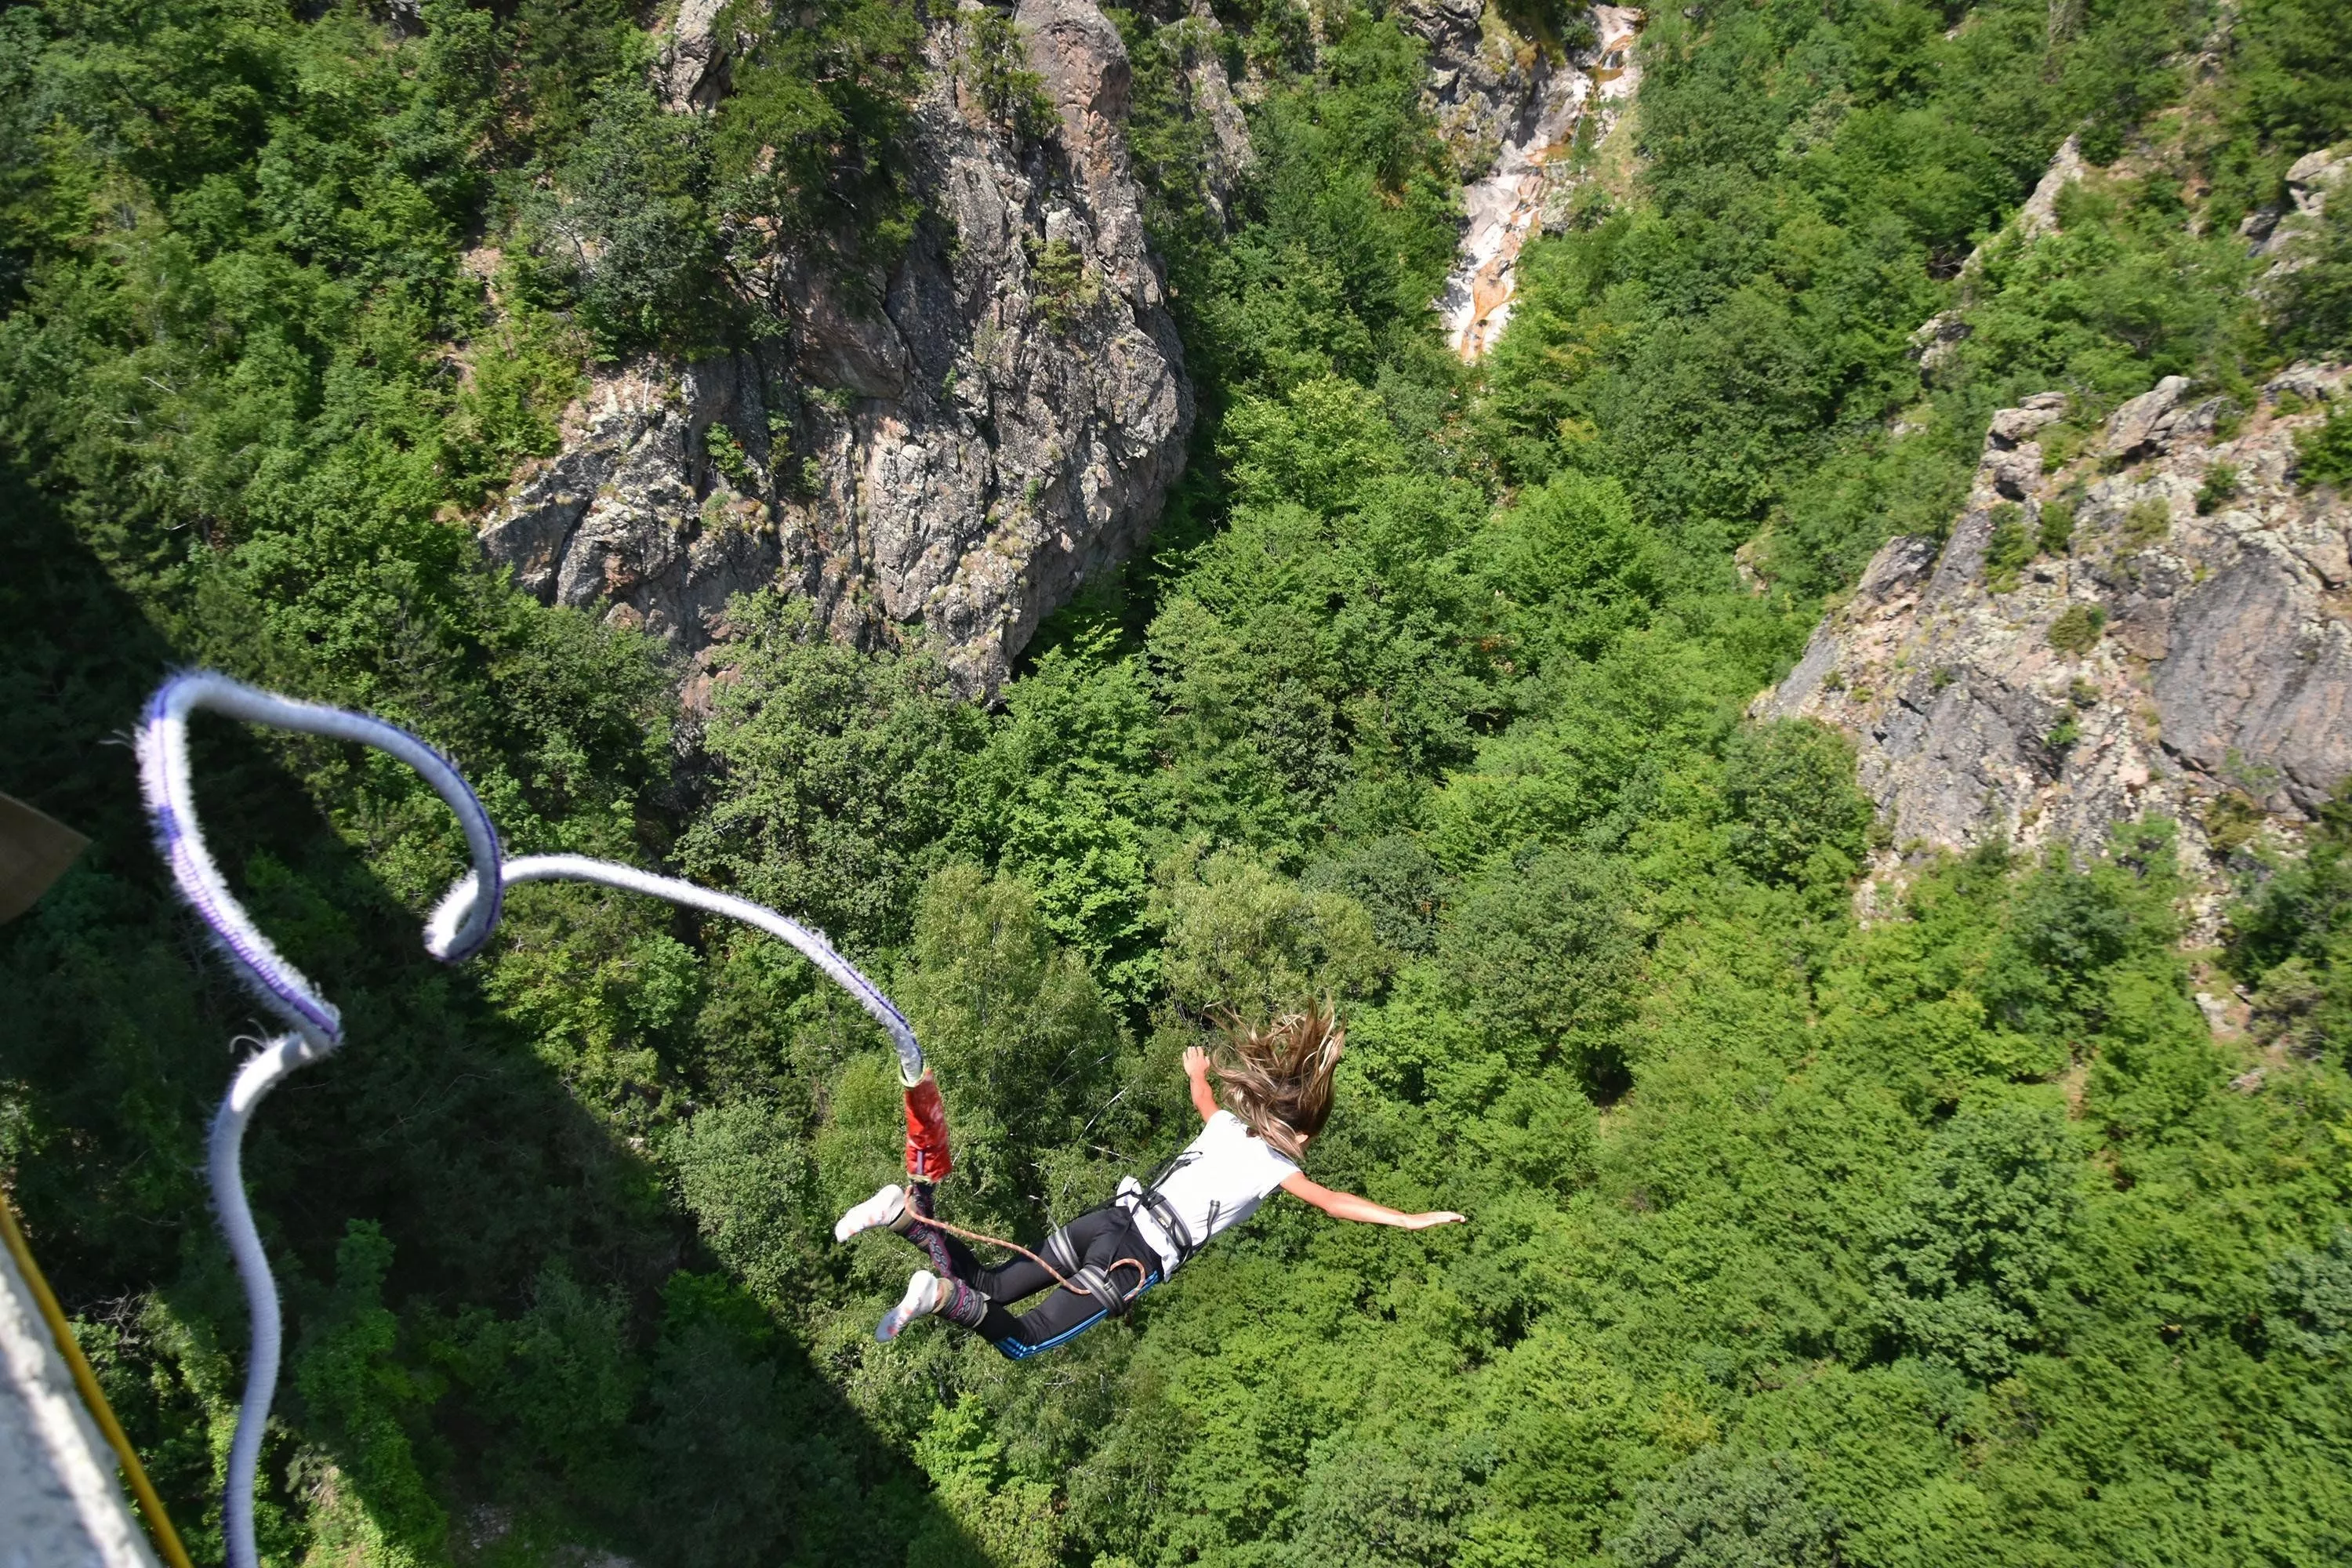 Bungyniouc in Switzerland, Europe | Bungee Jumping - Rated 0.9